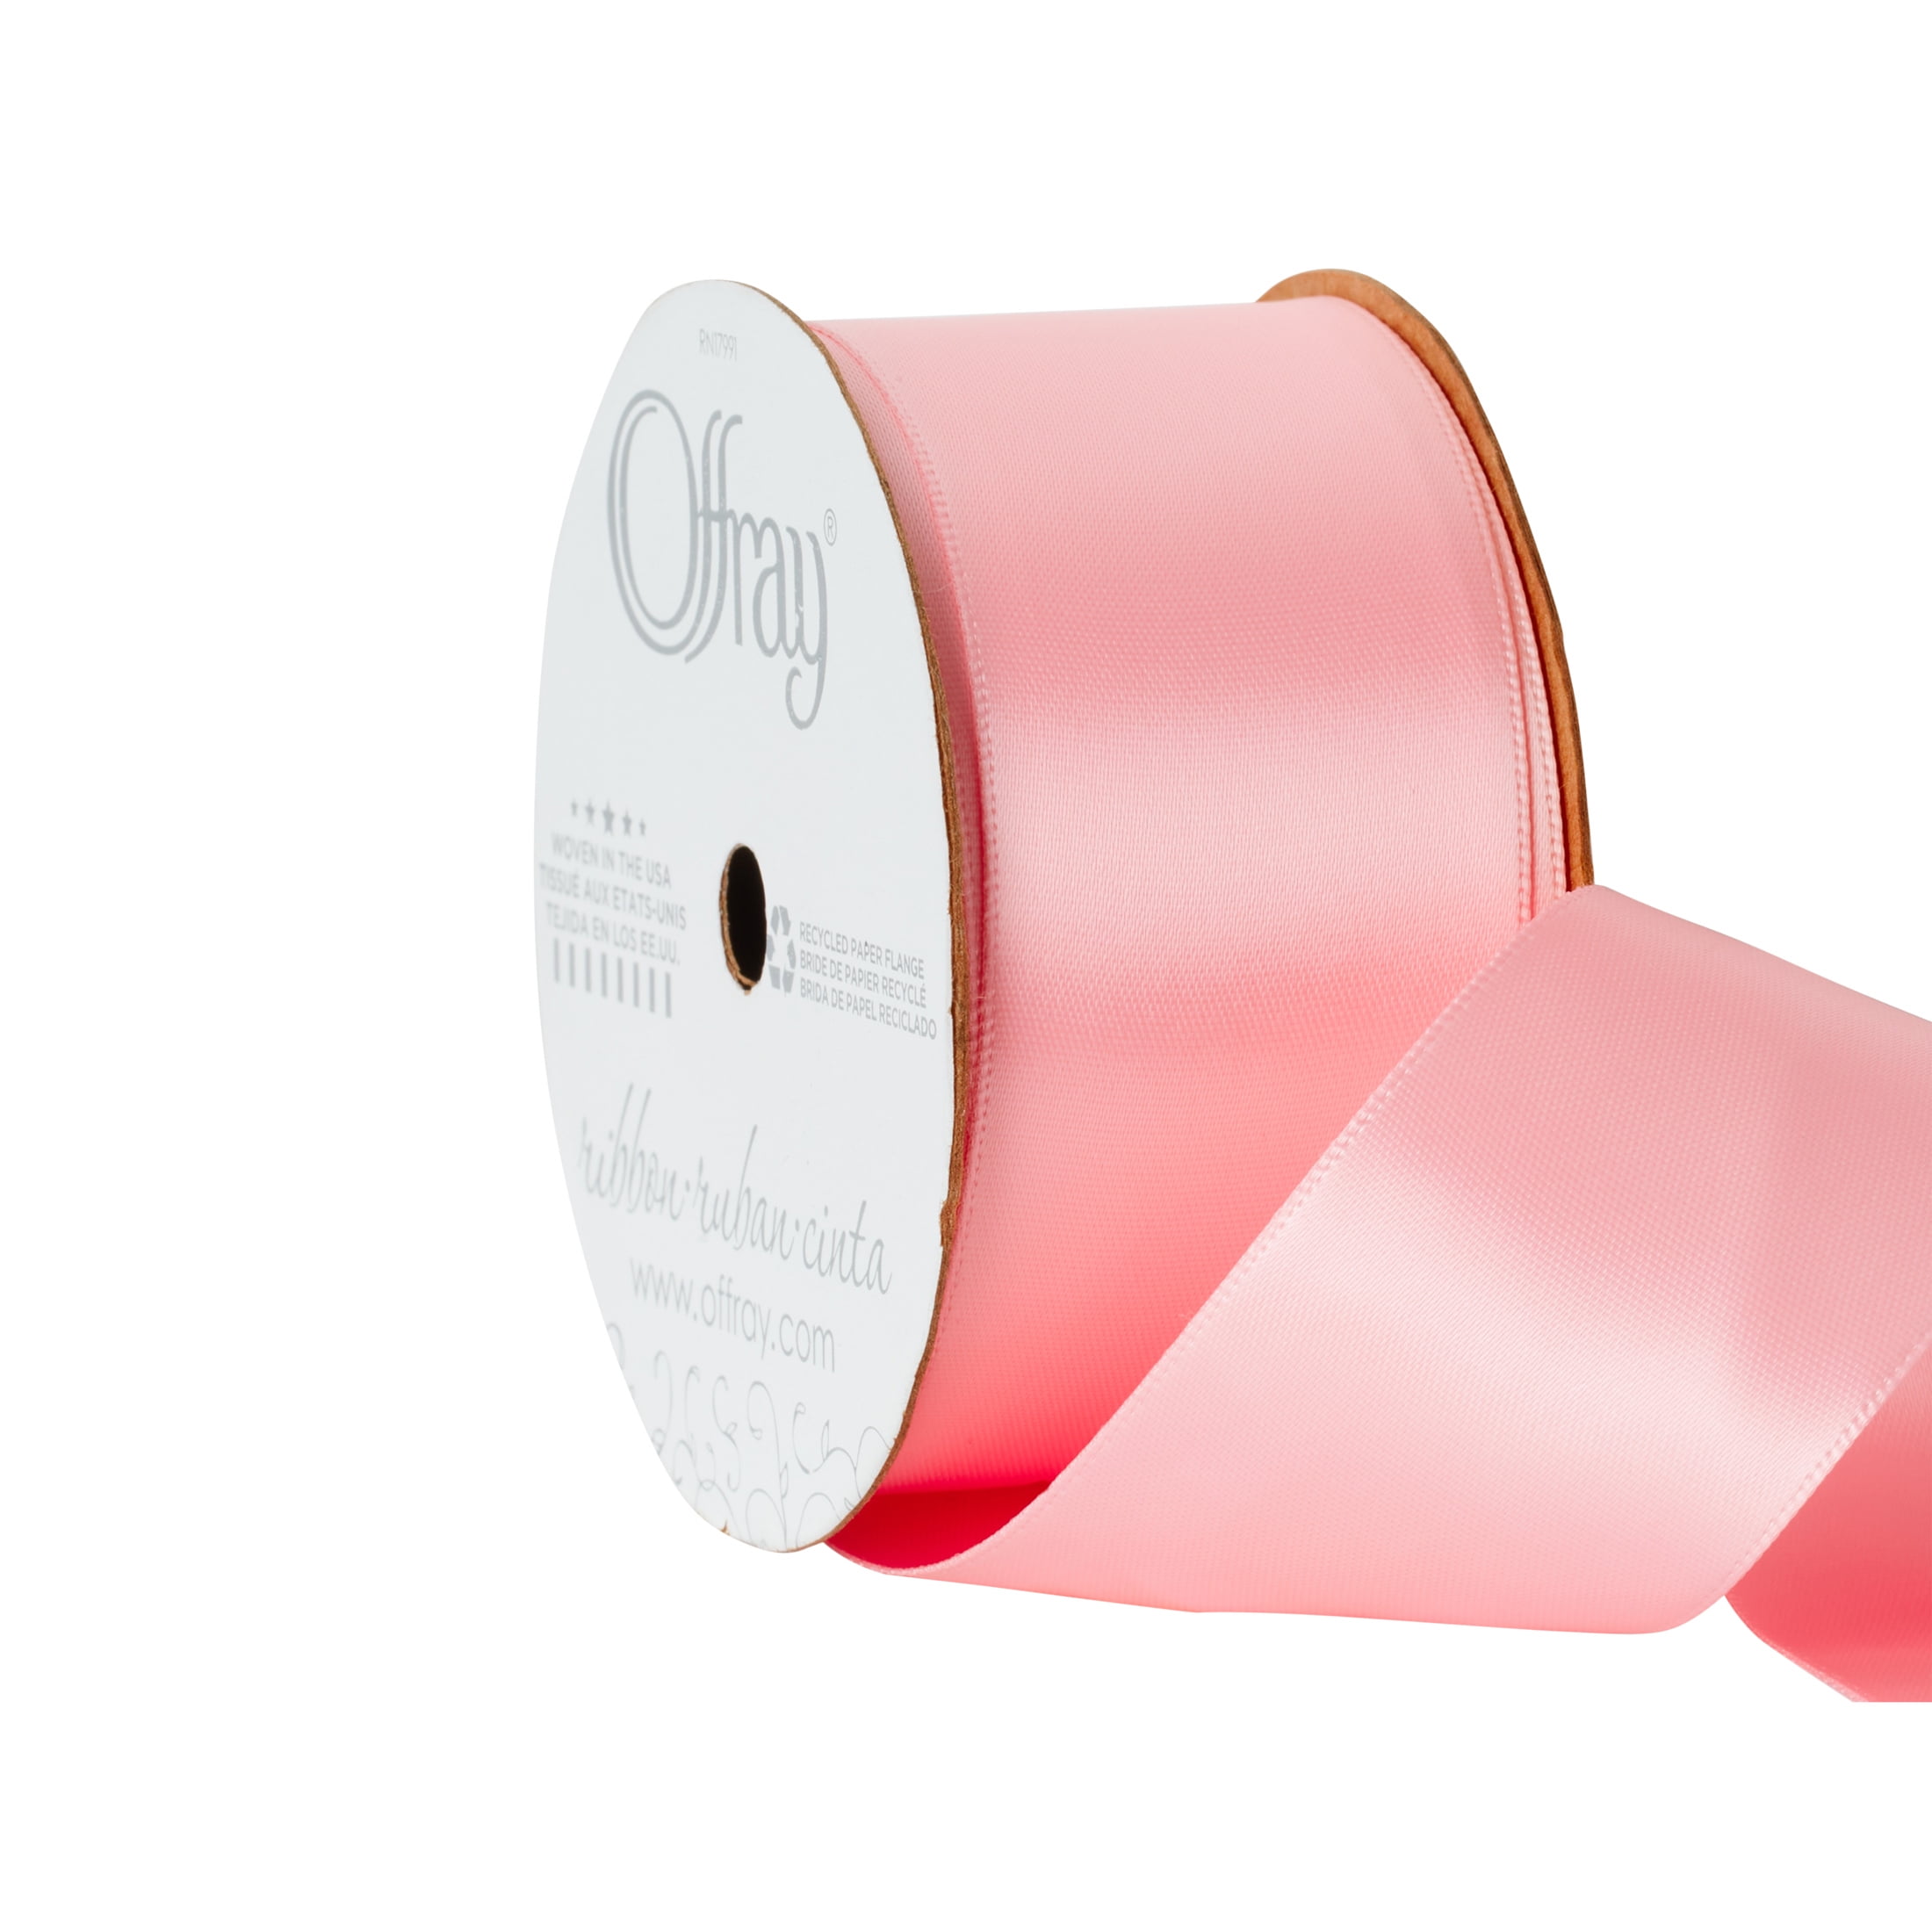 Neon pink double side satin ribbon - Lace To Love